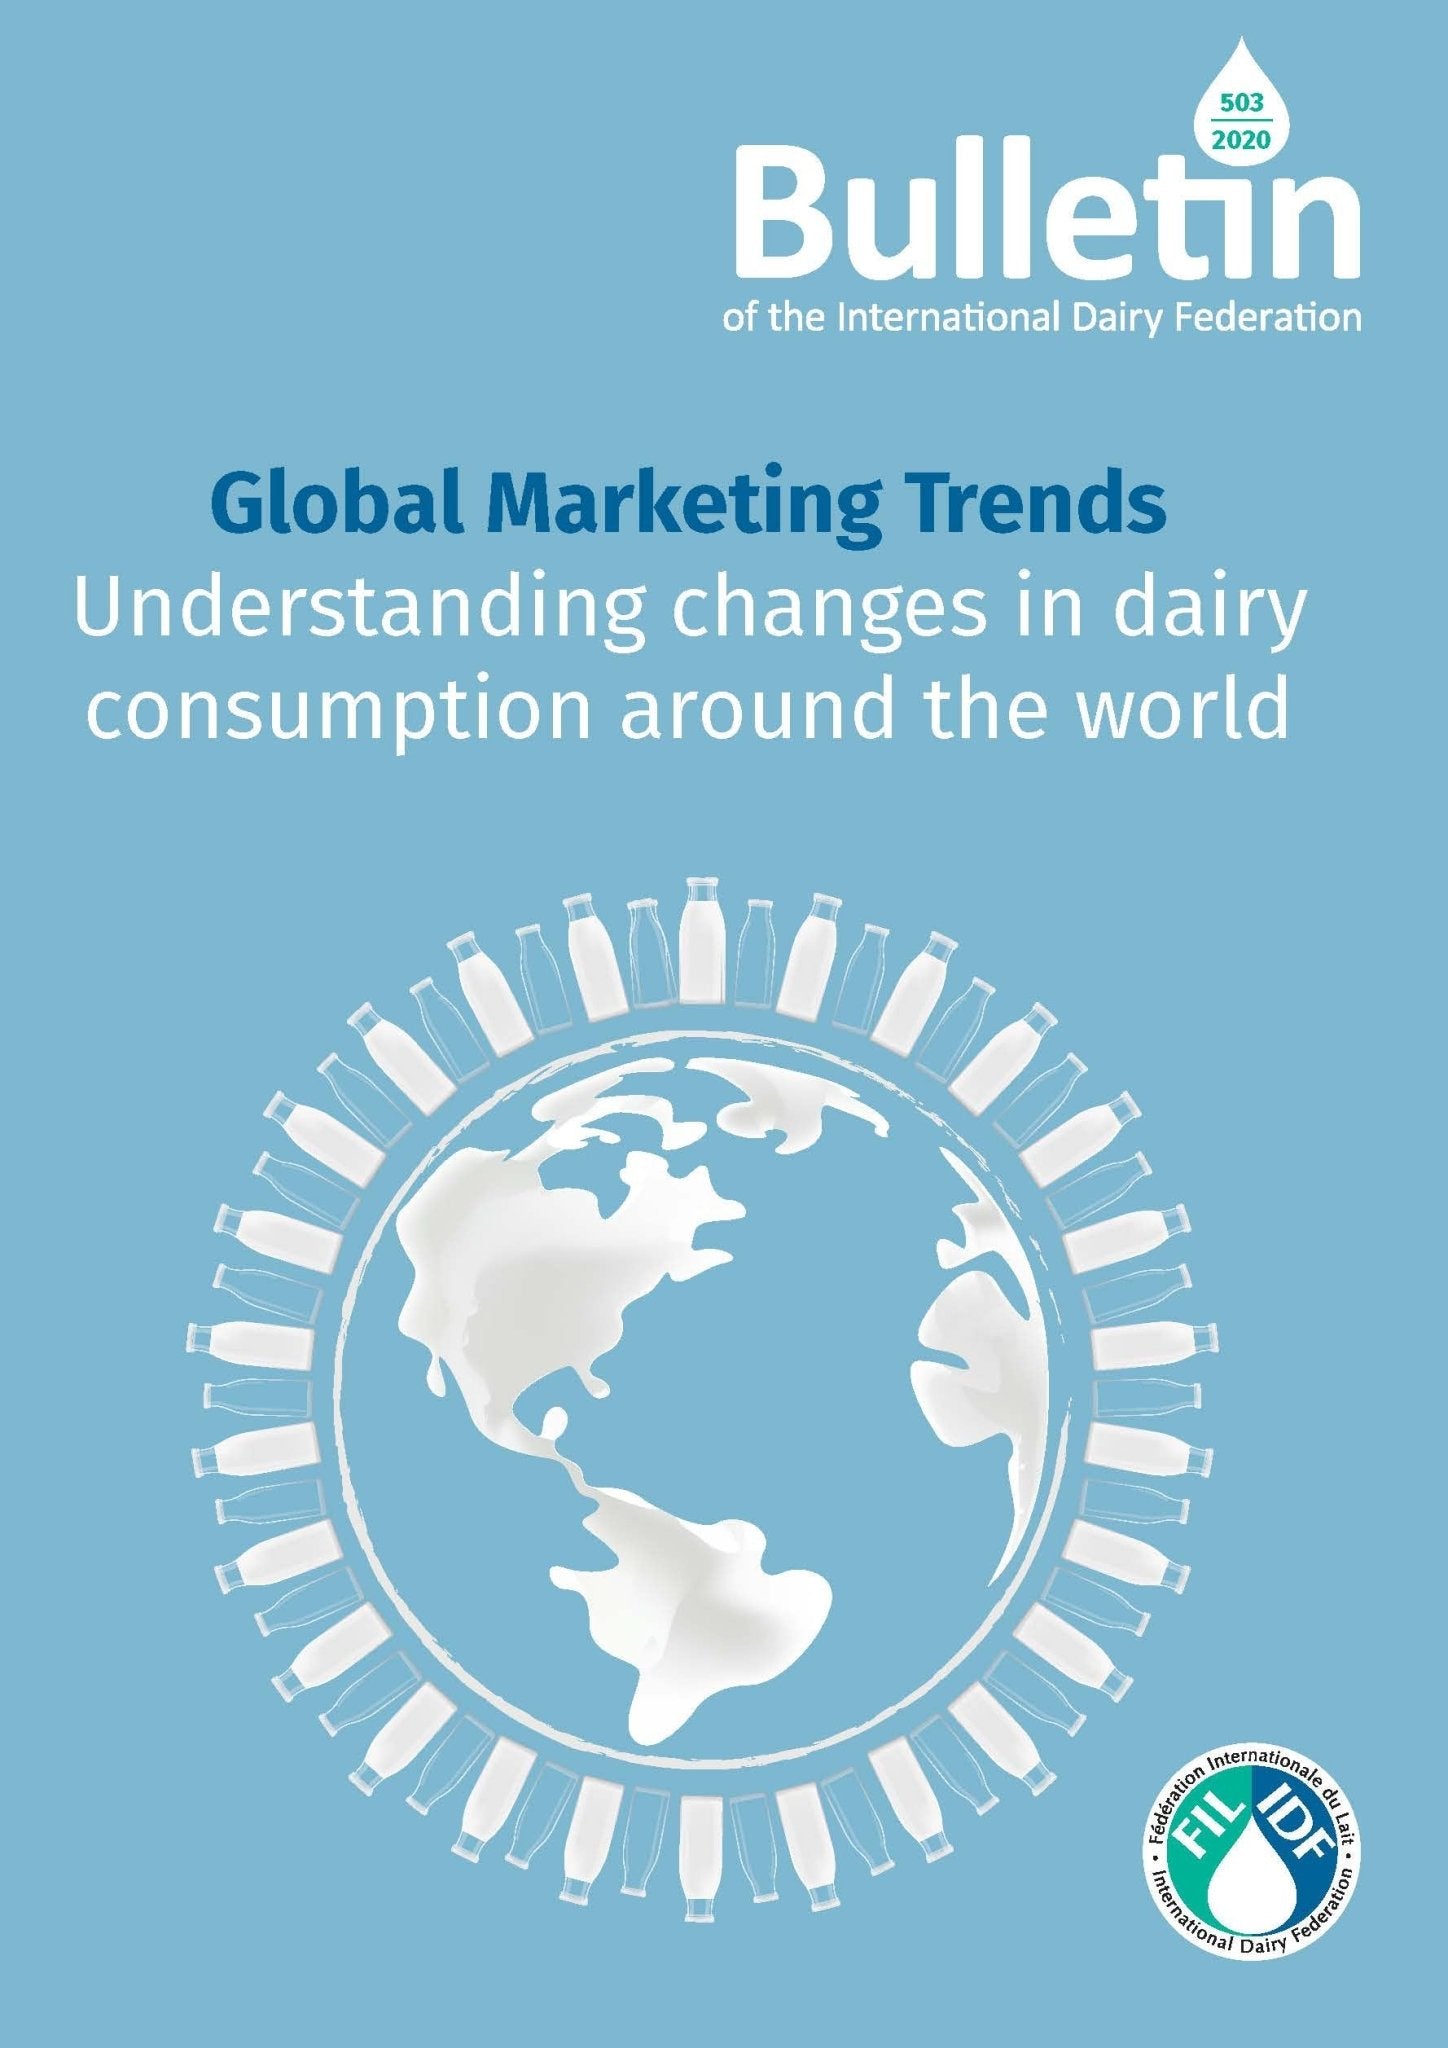 Bulletin of the IDF N° 503/2020: Global Marketing Trends, Understanding changes in dairy consumption around the world - FIL-IDF